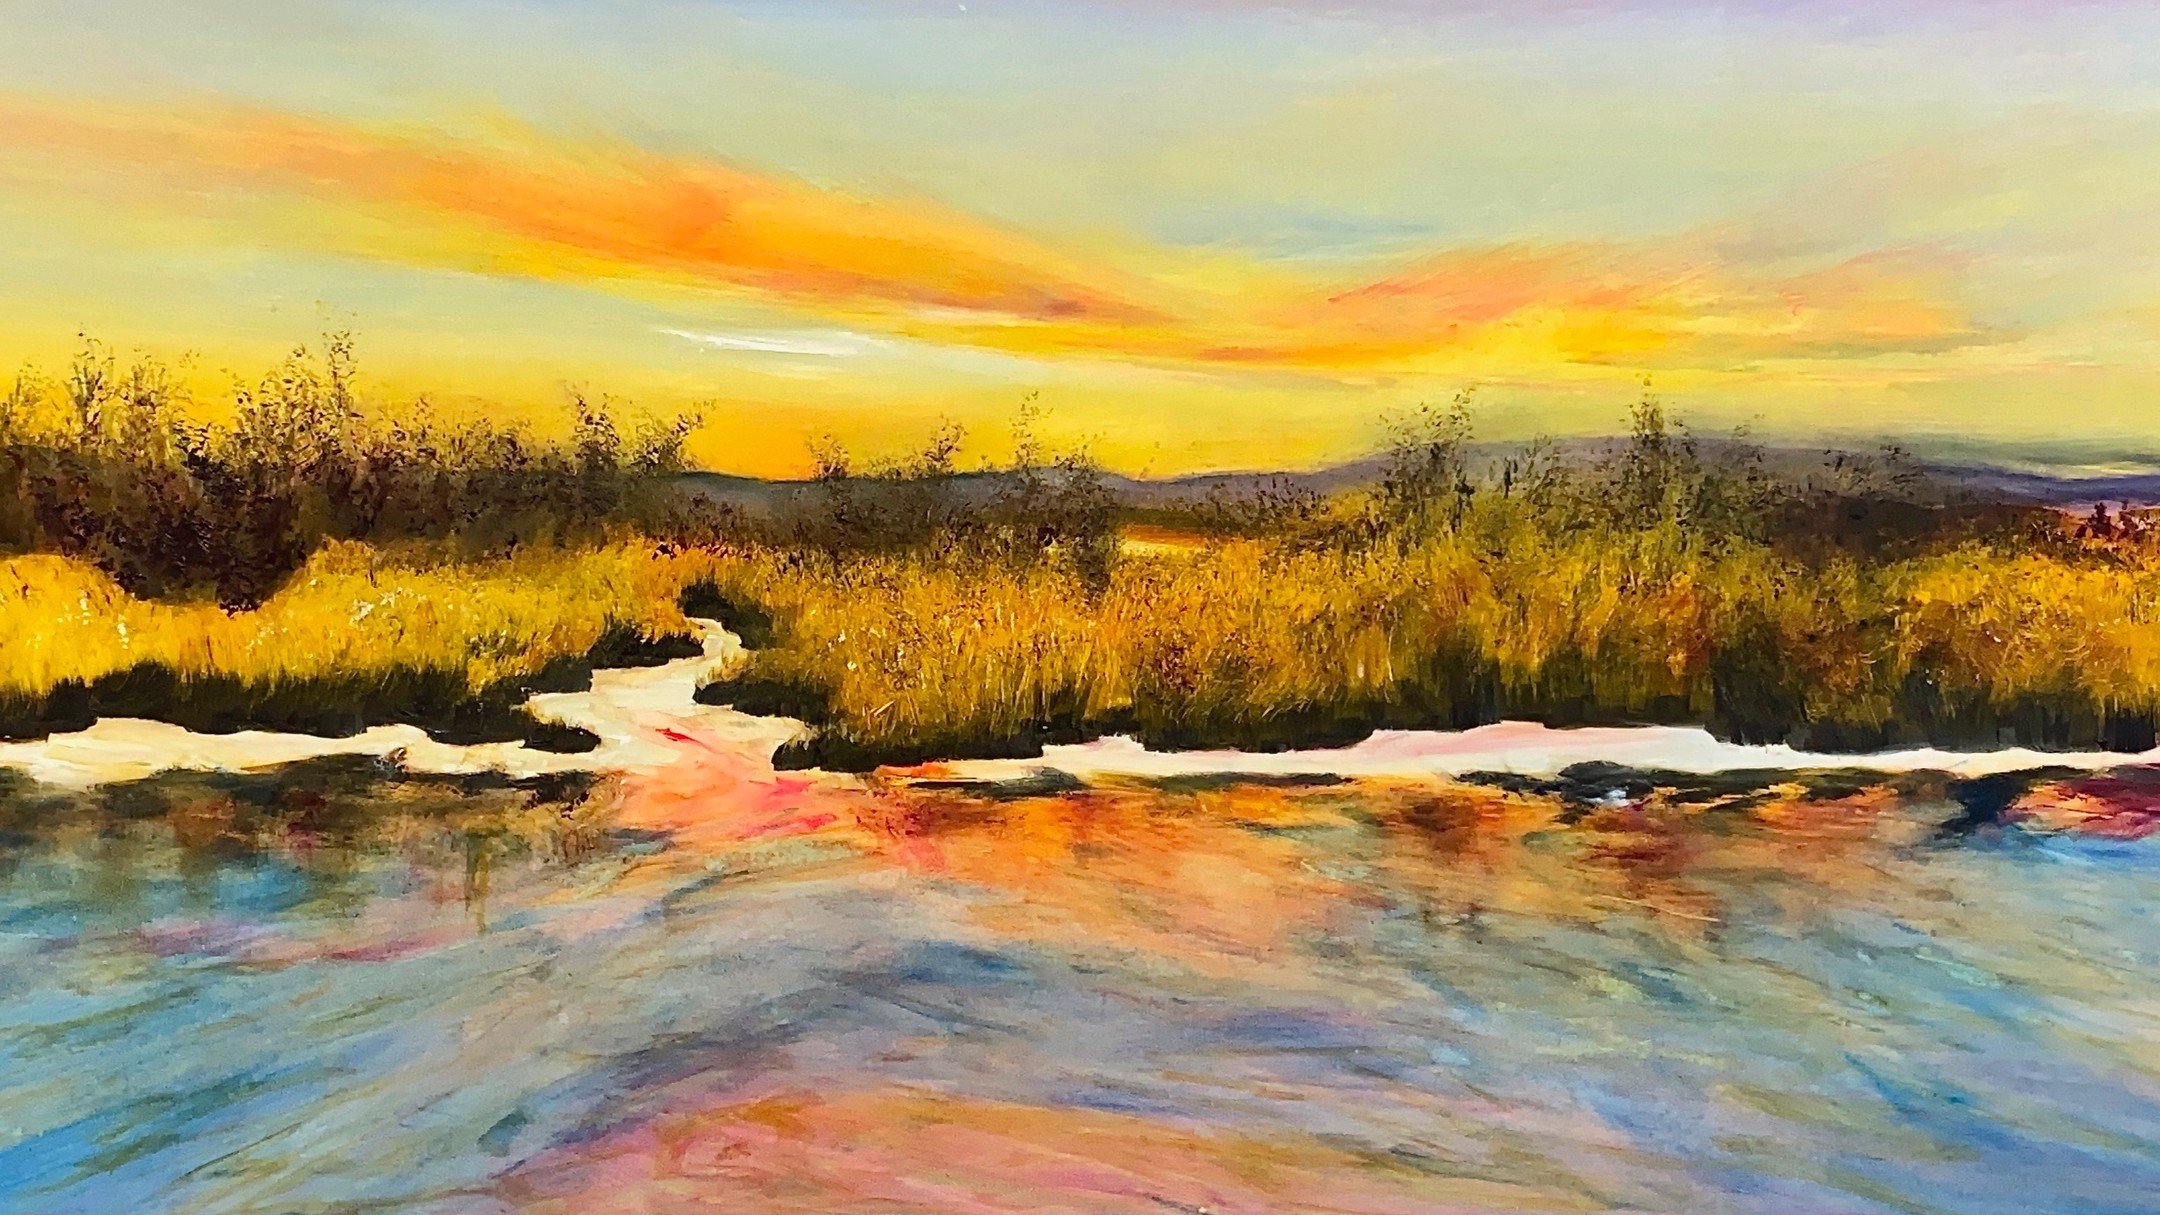 Recent landscape paintings. I can't stop painting the slough at the end of my street, at the intersection of the Beaverhead River in Twin Bridges, Montana. #Beaverheadriver #landscapepainting #montanaart #montanamoment #contemporarylandscapepainting 